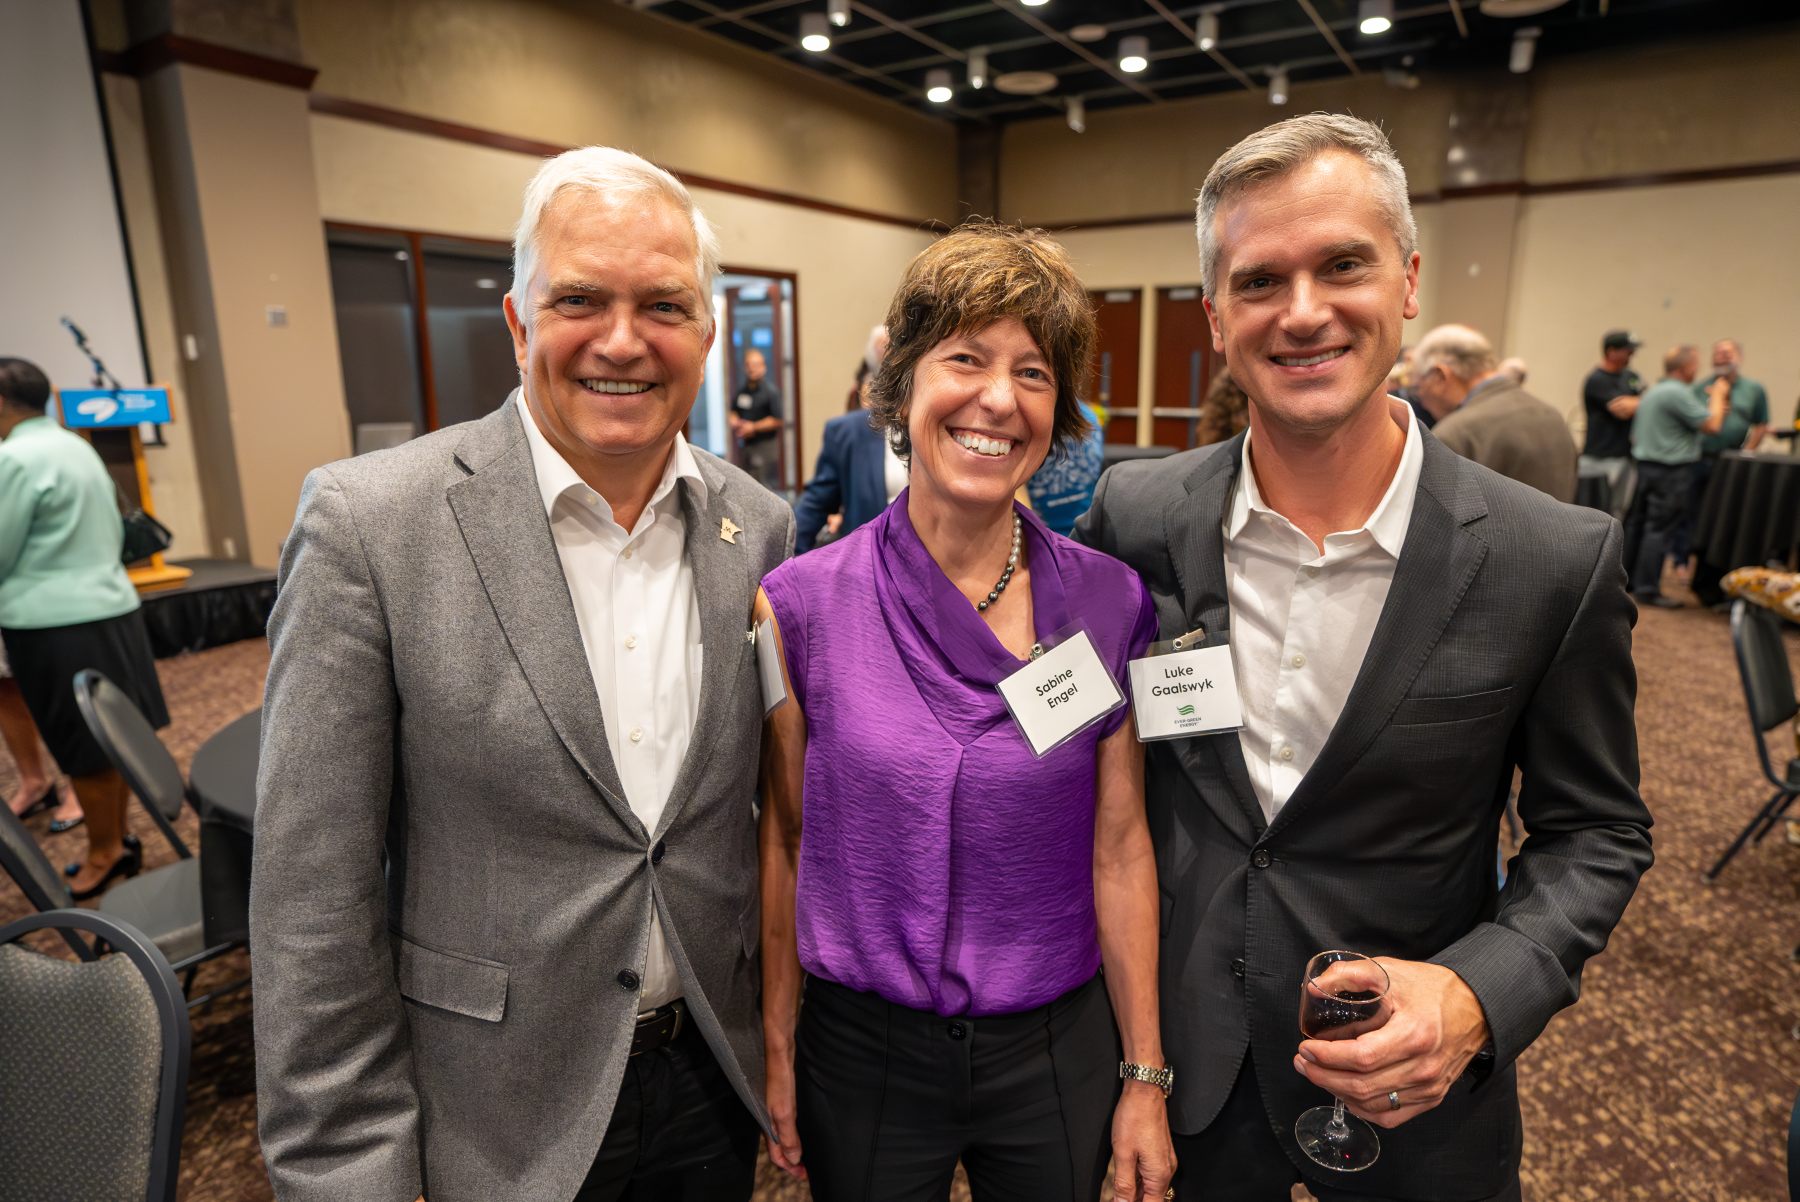 Three professionals in business clothes pose for a photo at an event.